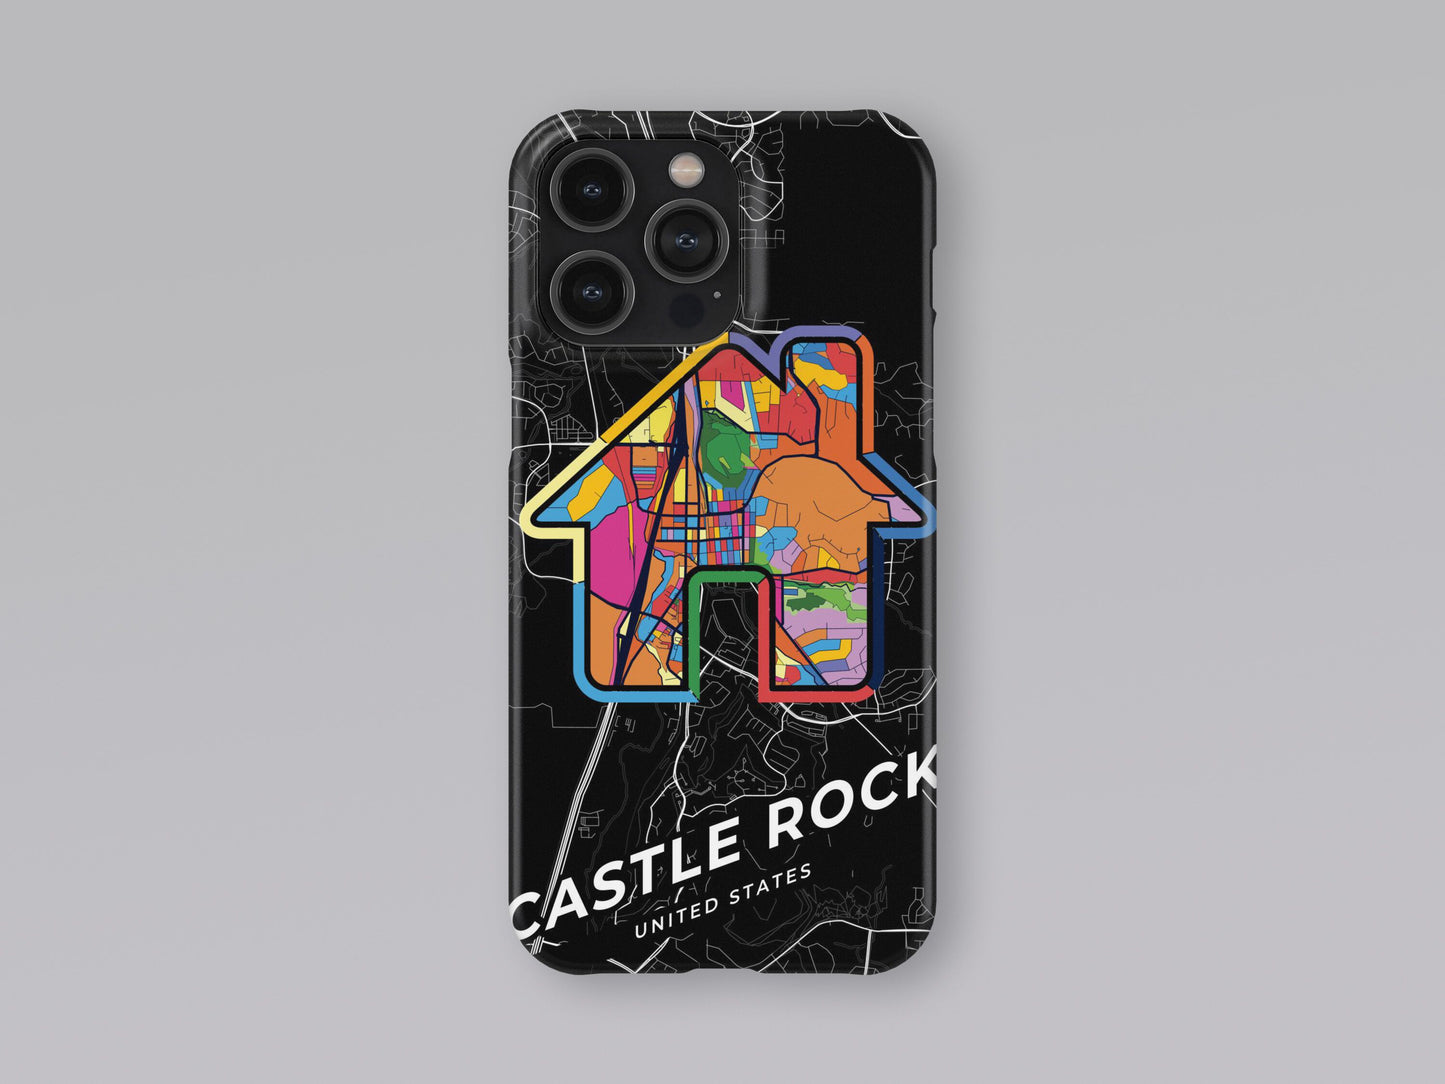 Castle Rock Colorado slim phone case with colorful icon. Birthday, wedding or housewarming gift. Couple match cases. 3